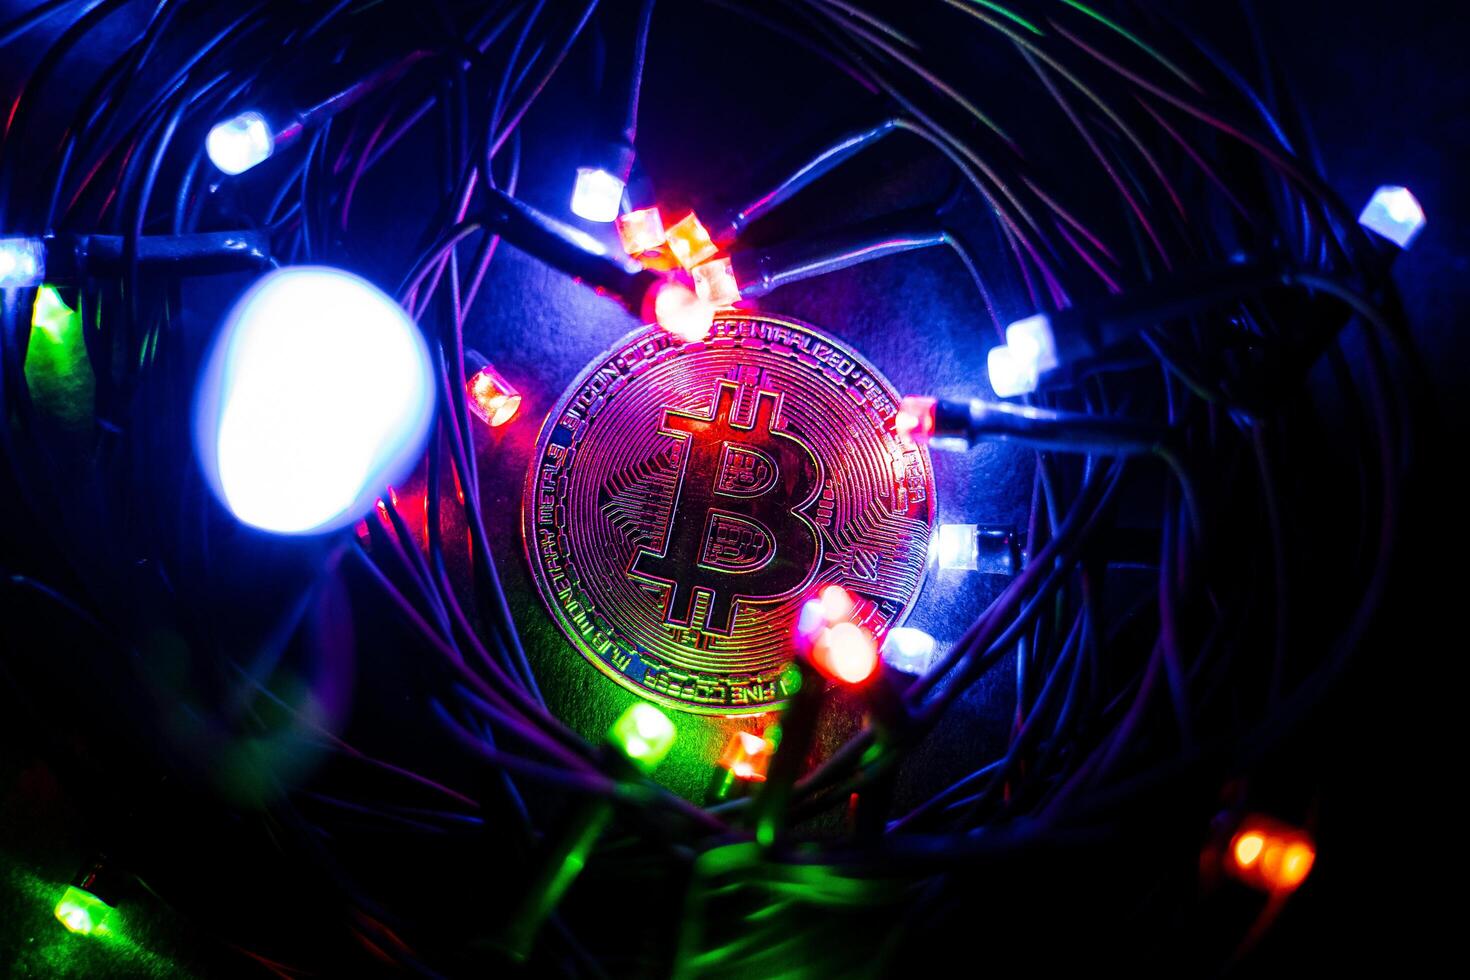 Bitcoin coin lies among the New Year's garlands. Souvenir coin. Digital money in the modern world. The growing market of electronic money photo